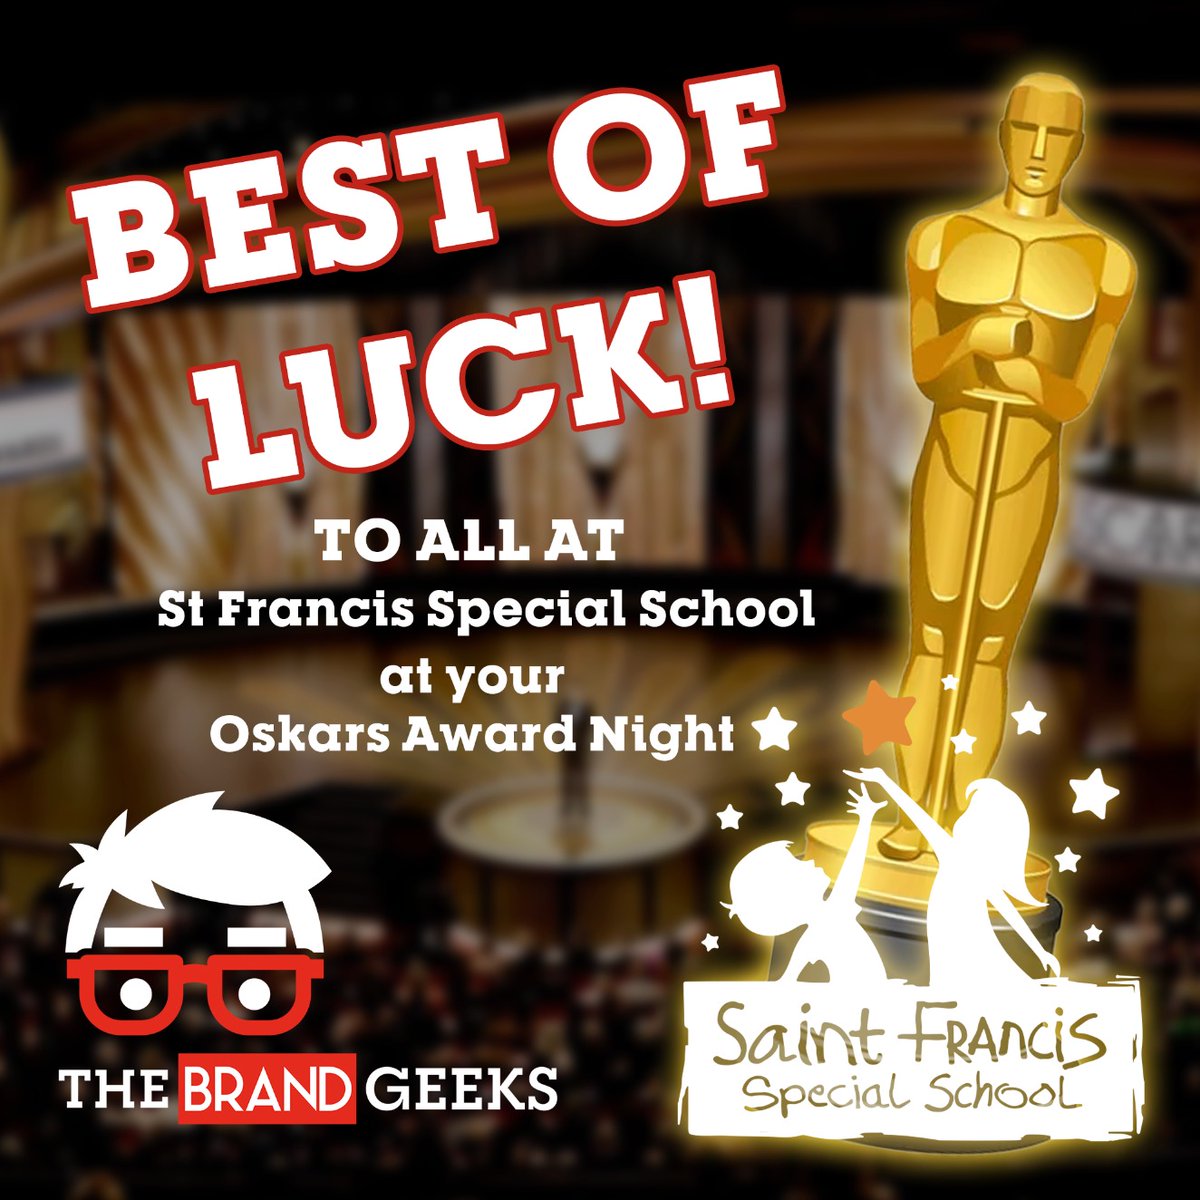 The day has arrived, the Oscar's have been polished and the Red Carpet has been rolled out! On behalf of all the Geeks here we would like to wish St Francis Special School the very best on their Oskars night in @gleneagleinecarena tonight!

#SDSSDoesOskars #inec #Killarney